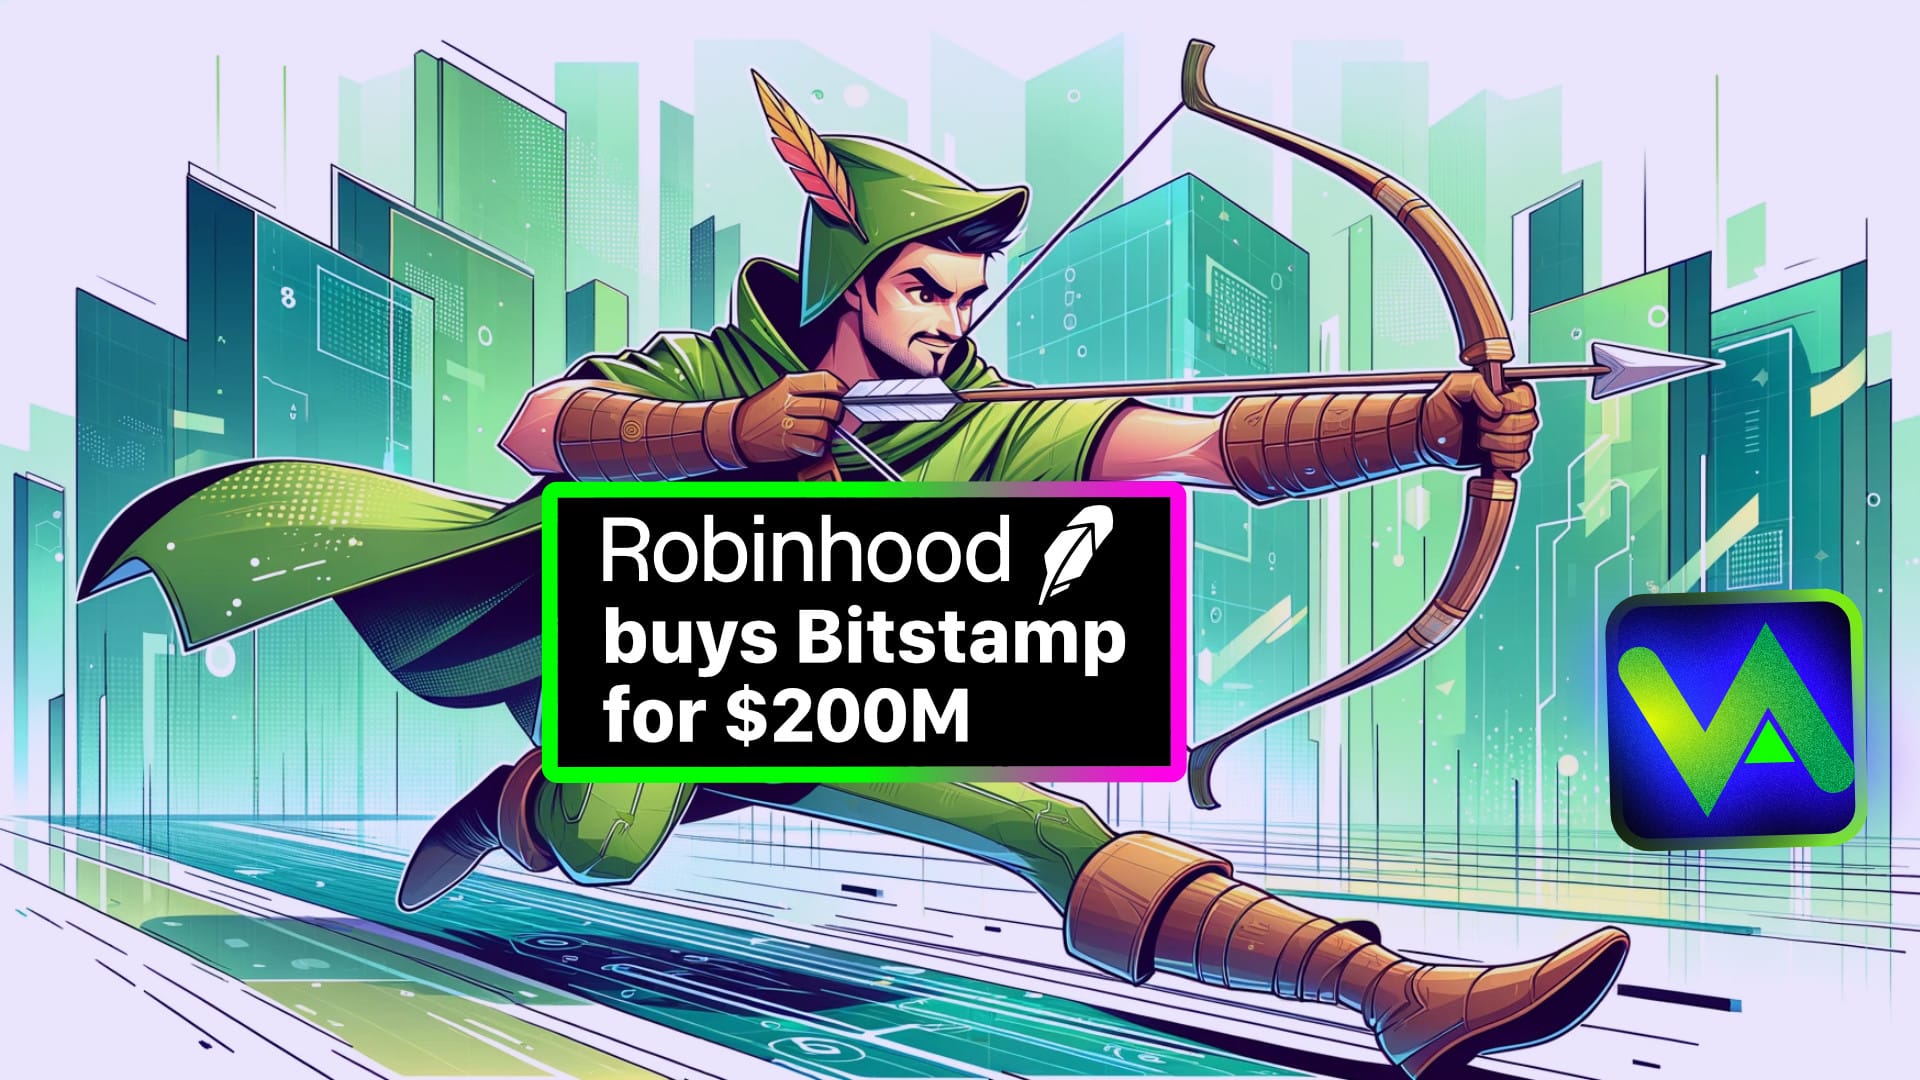 Robinhood Expands Crypto Reach with $200M Bitstamp Purchase